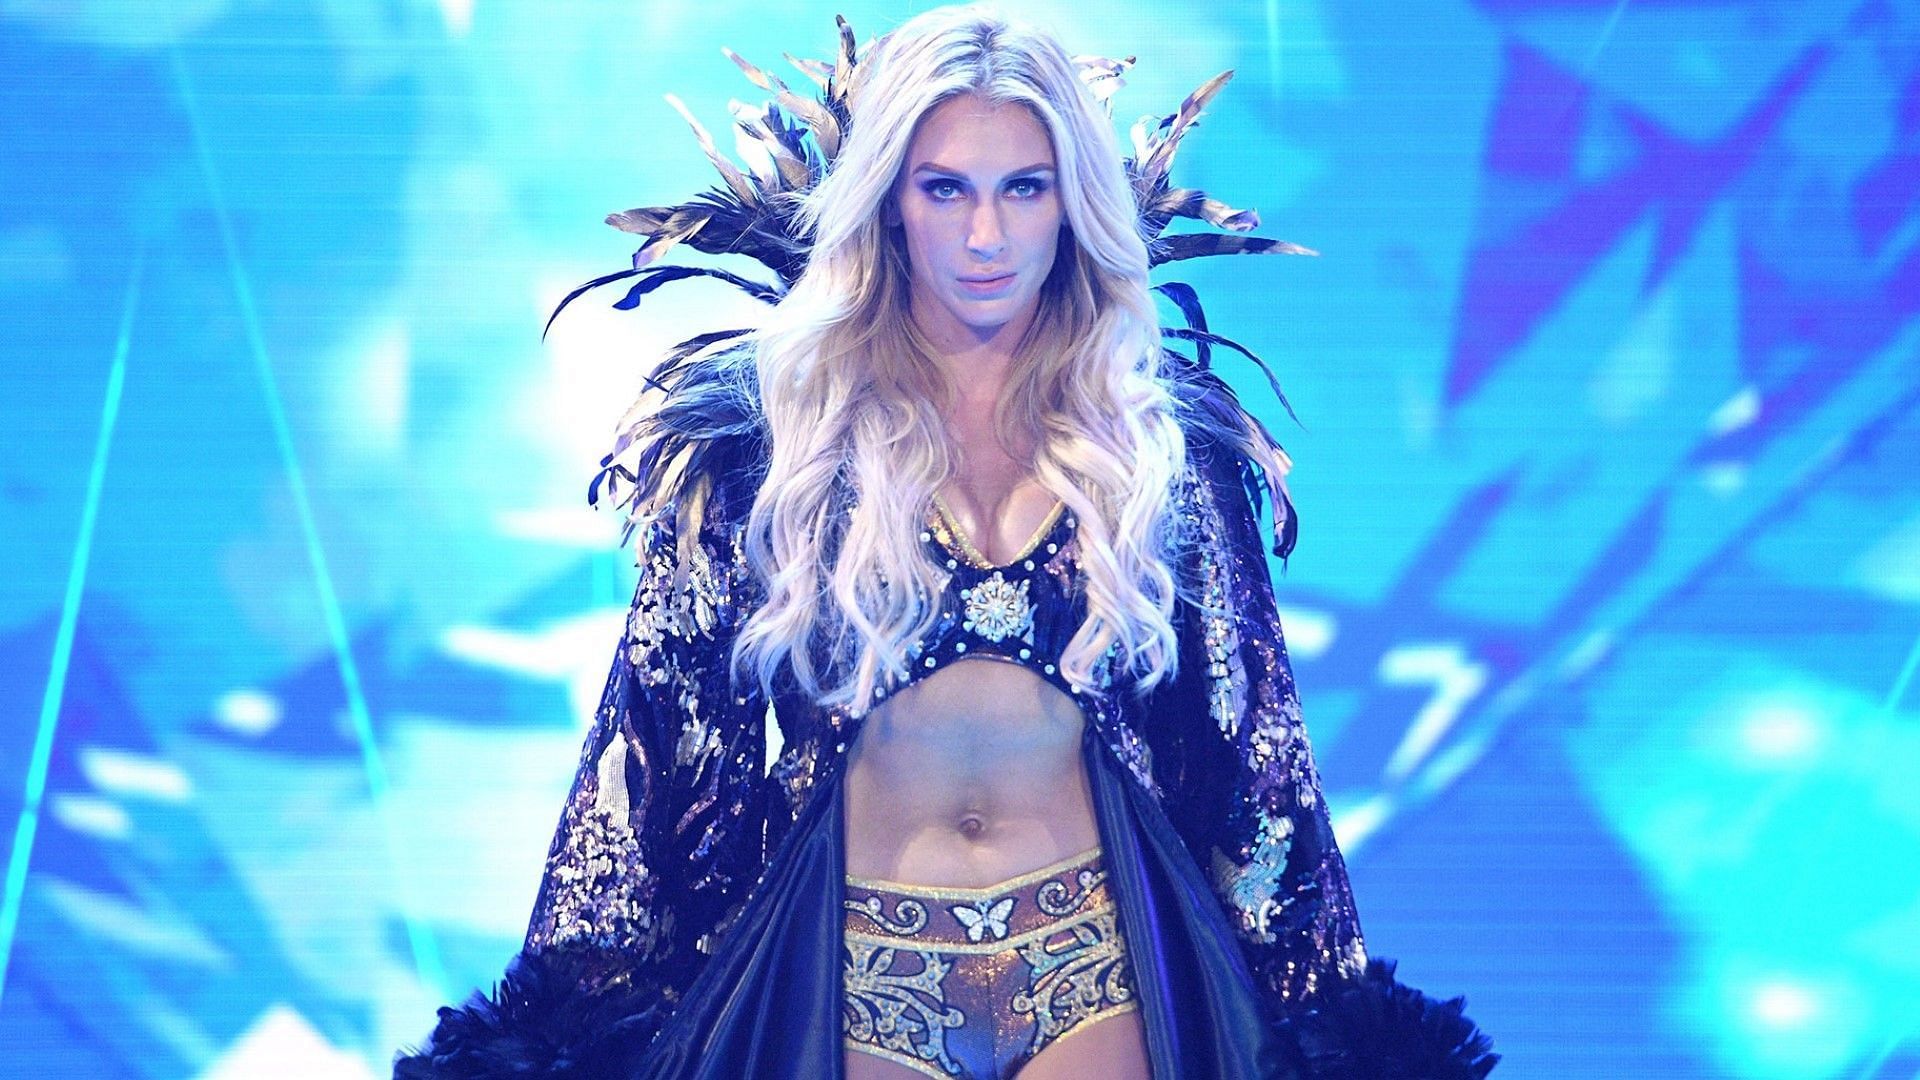 Charlotte Flair heads to the WWE ring